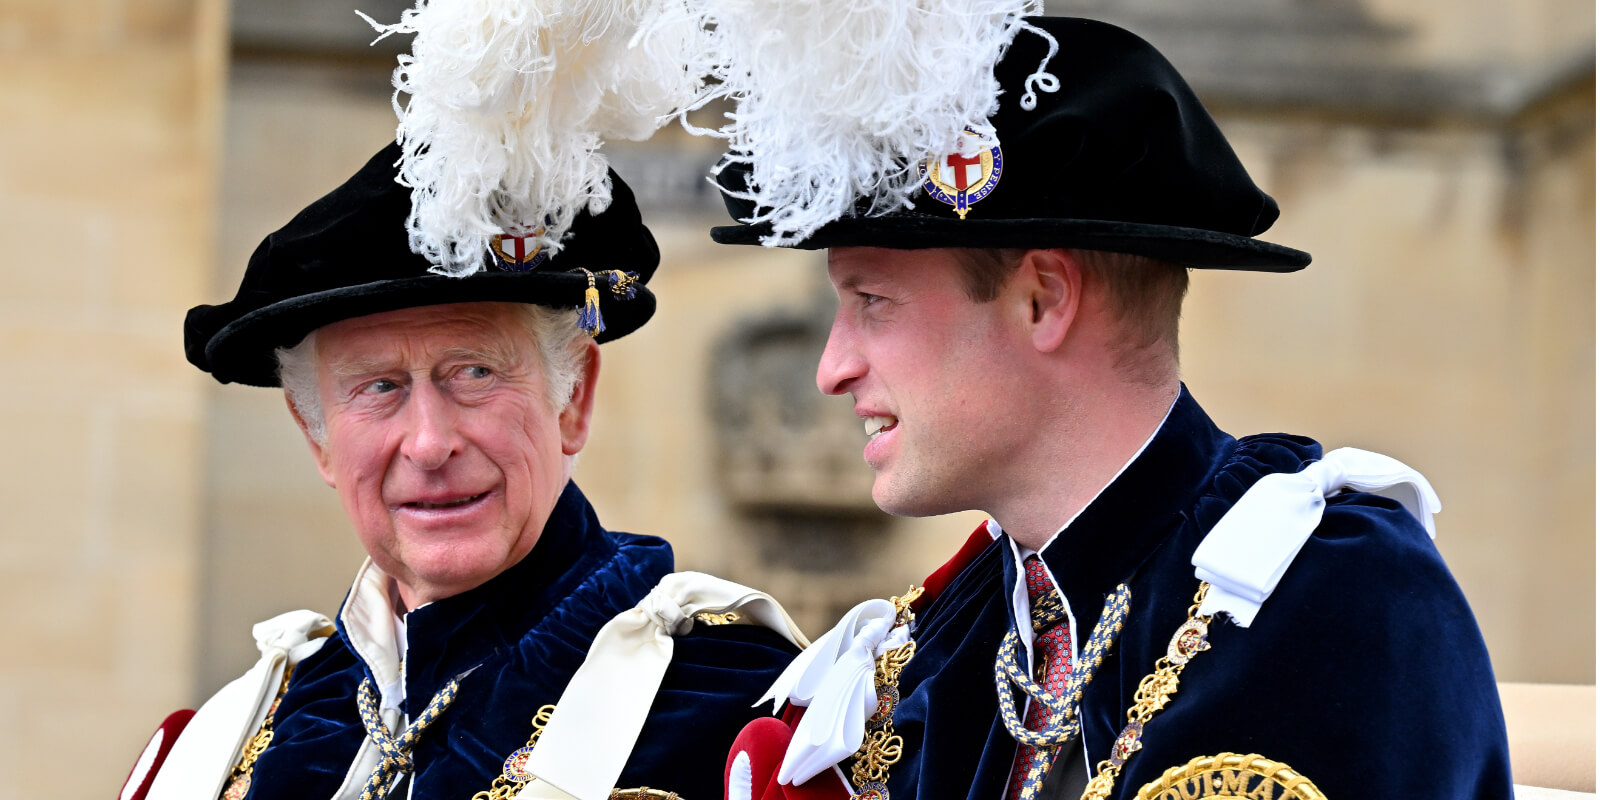 King Charles III and his son Prince William at The Order of The Garter service at St George's Chapel, Windsor Castle on June 13, 2022 in Windsor, England.